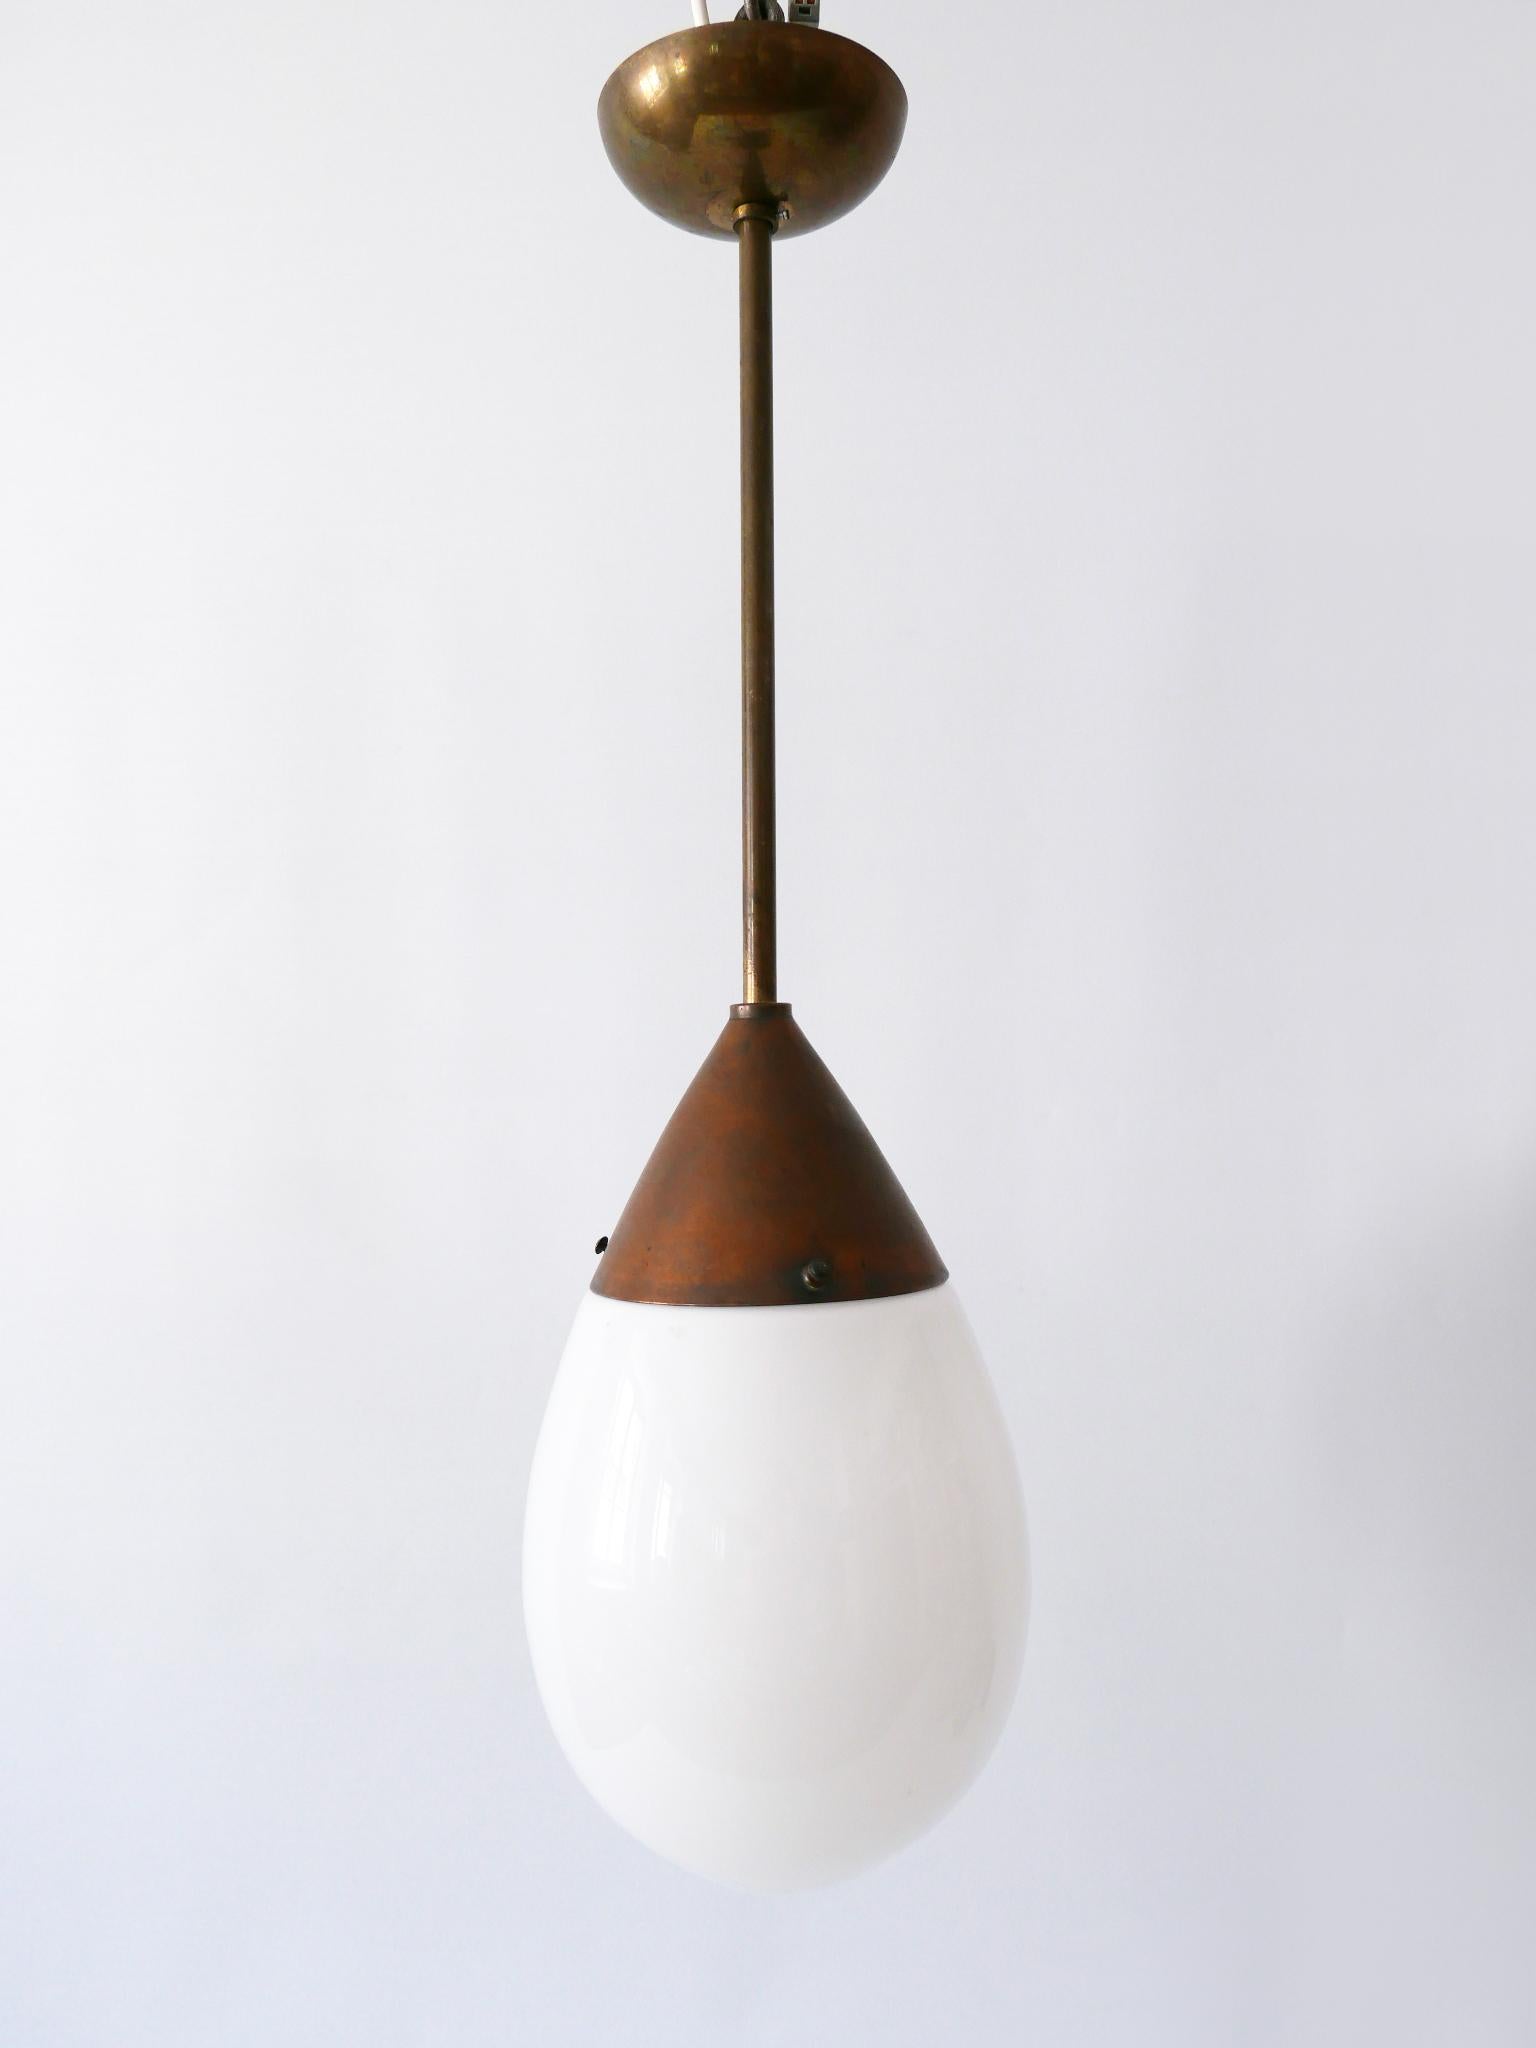 Early 20th Century Exceptional Bauhaus Pendant Lamp or Hanging Light Drop by Siemens 1920s, Germany For Sale